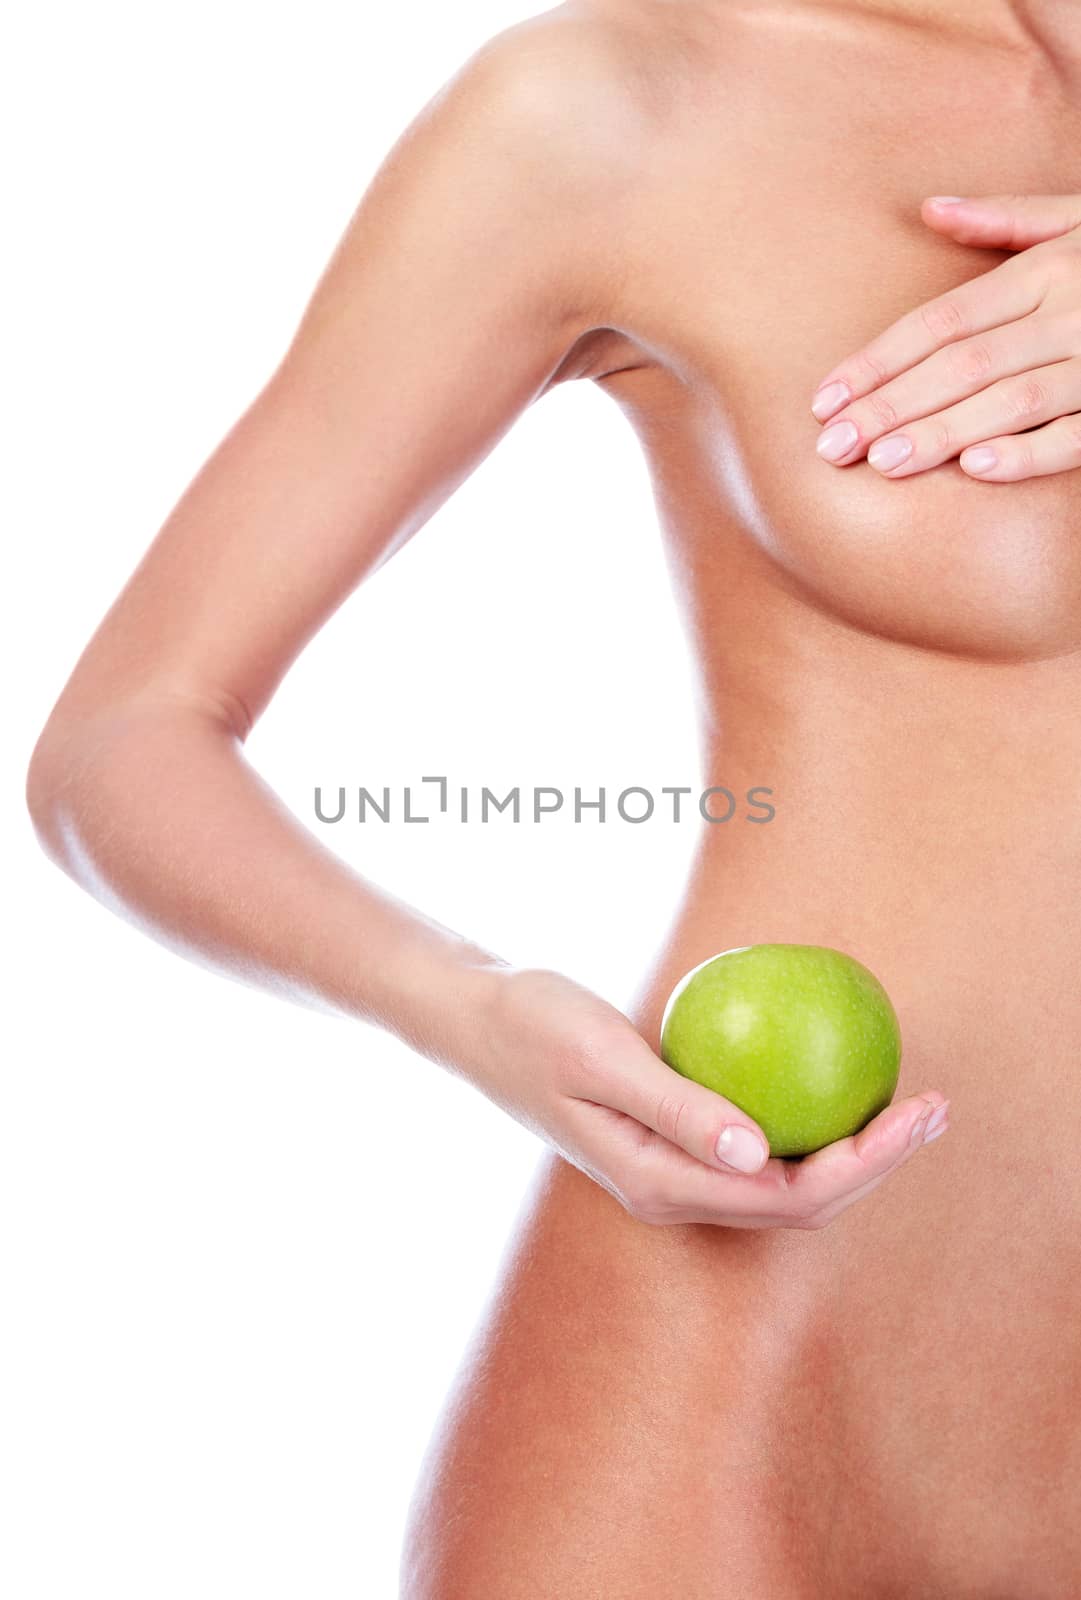 Woman holding green apple isolated on white background